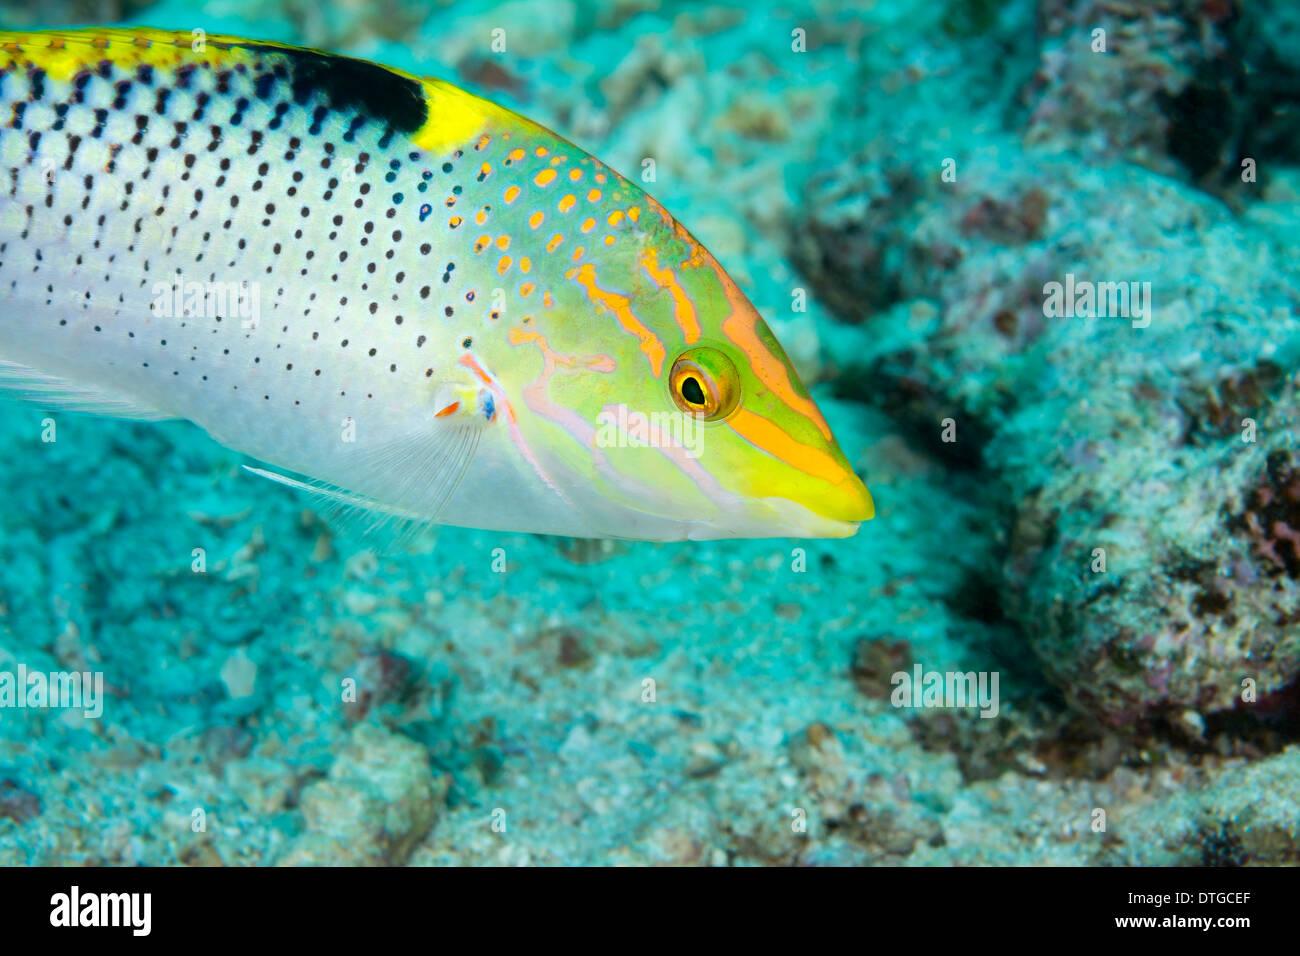 A beautiful vibrant tropical fish called a wrasse swims over a reef in Fiji. Focus is on the eye. Stock Photo